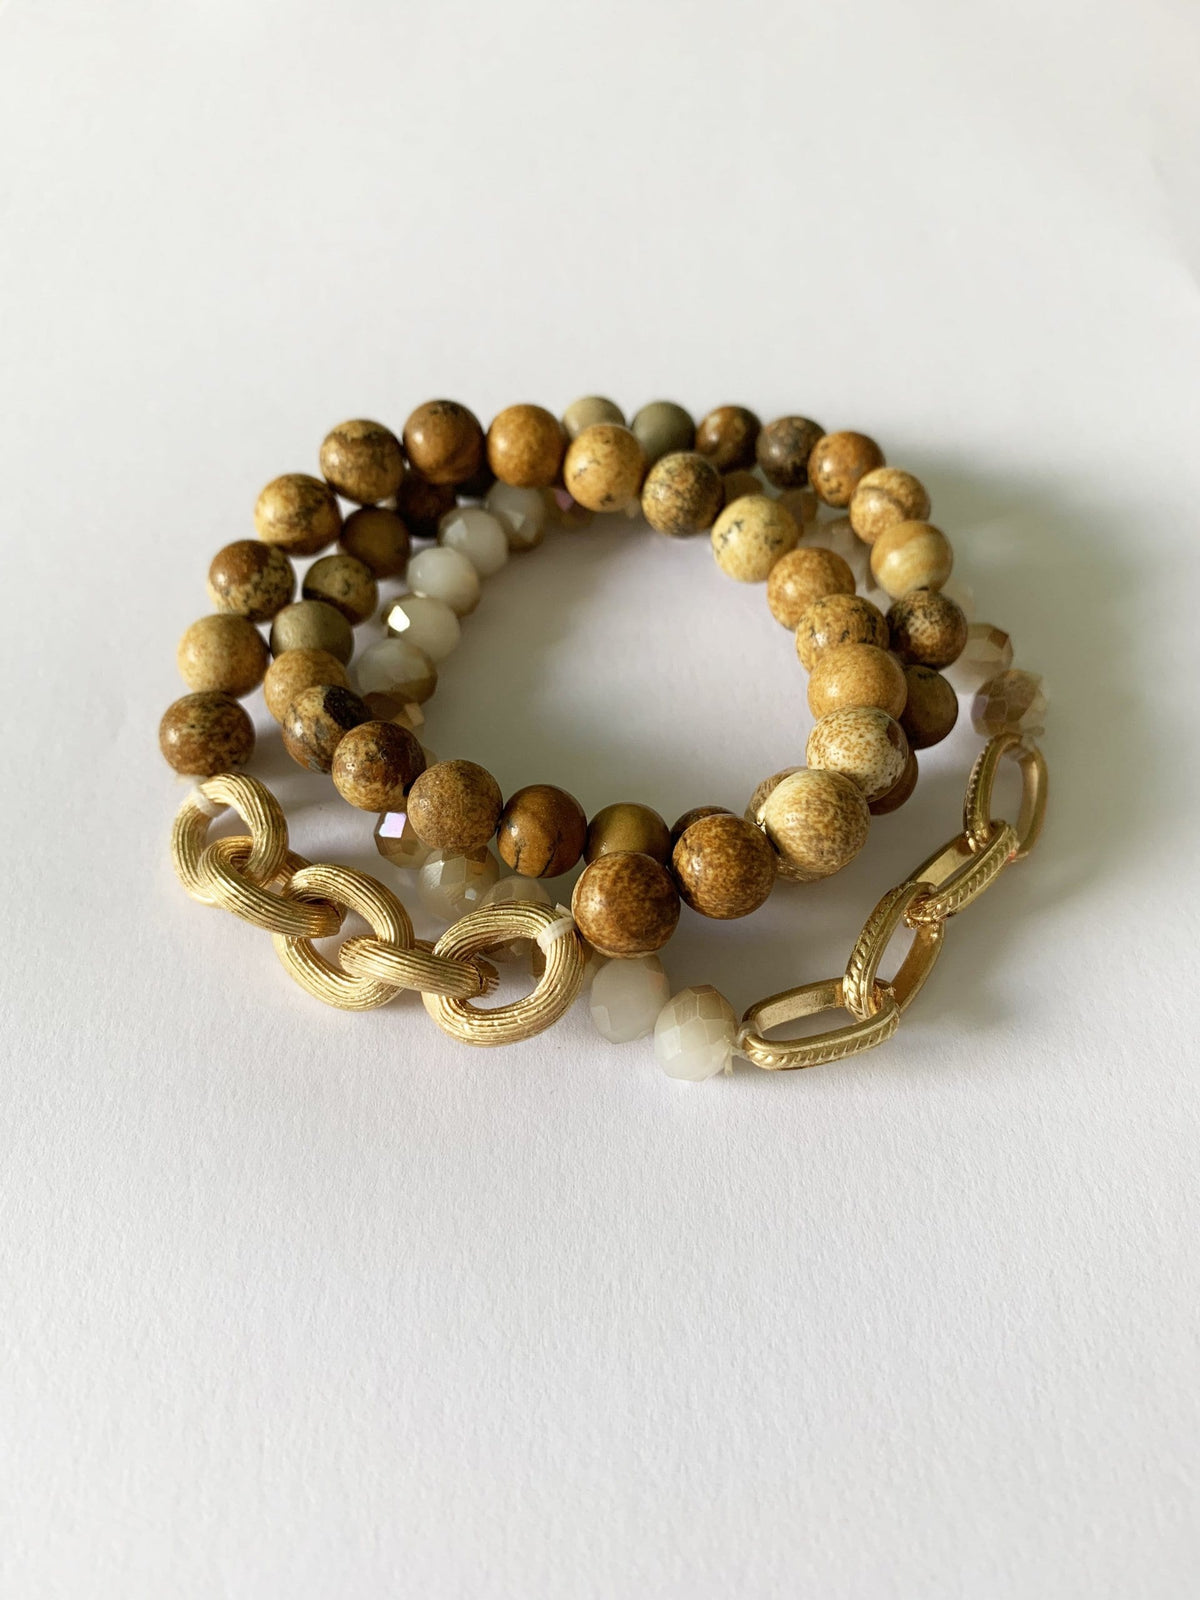 Natural/Pastel Beads With Gold Chain Bracelets- Set of 3